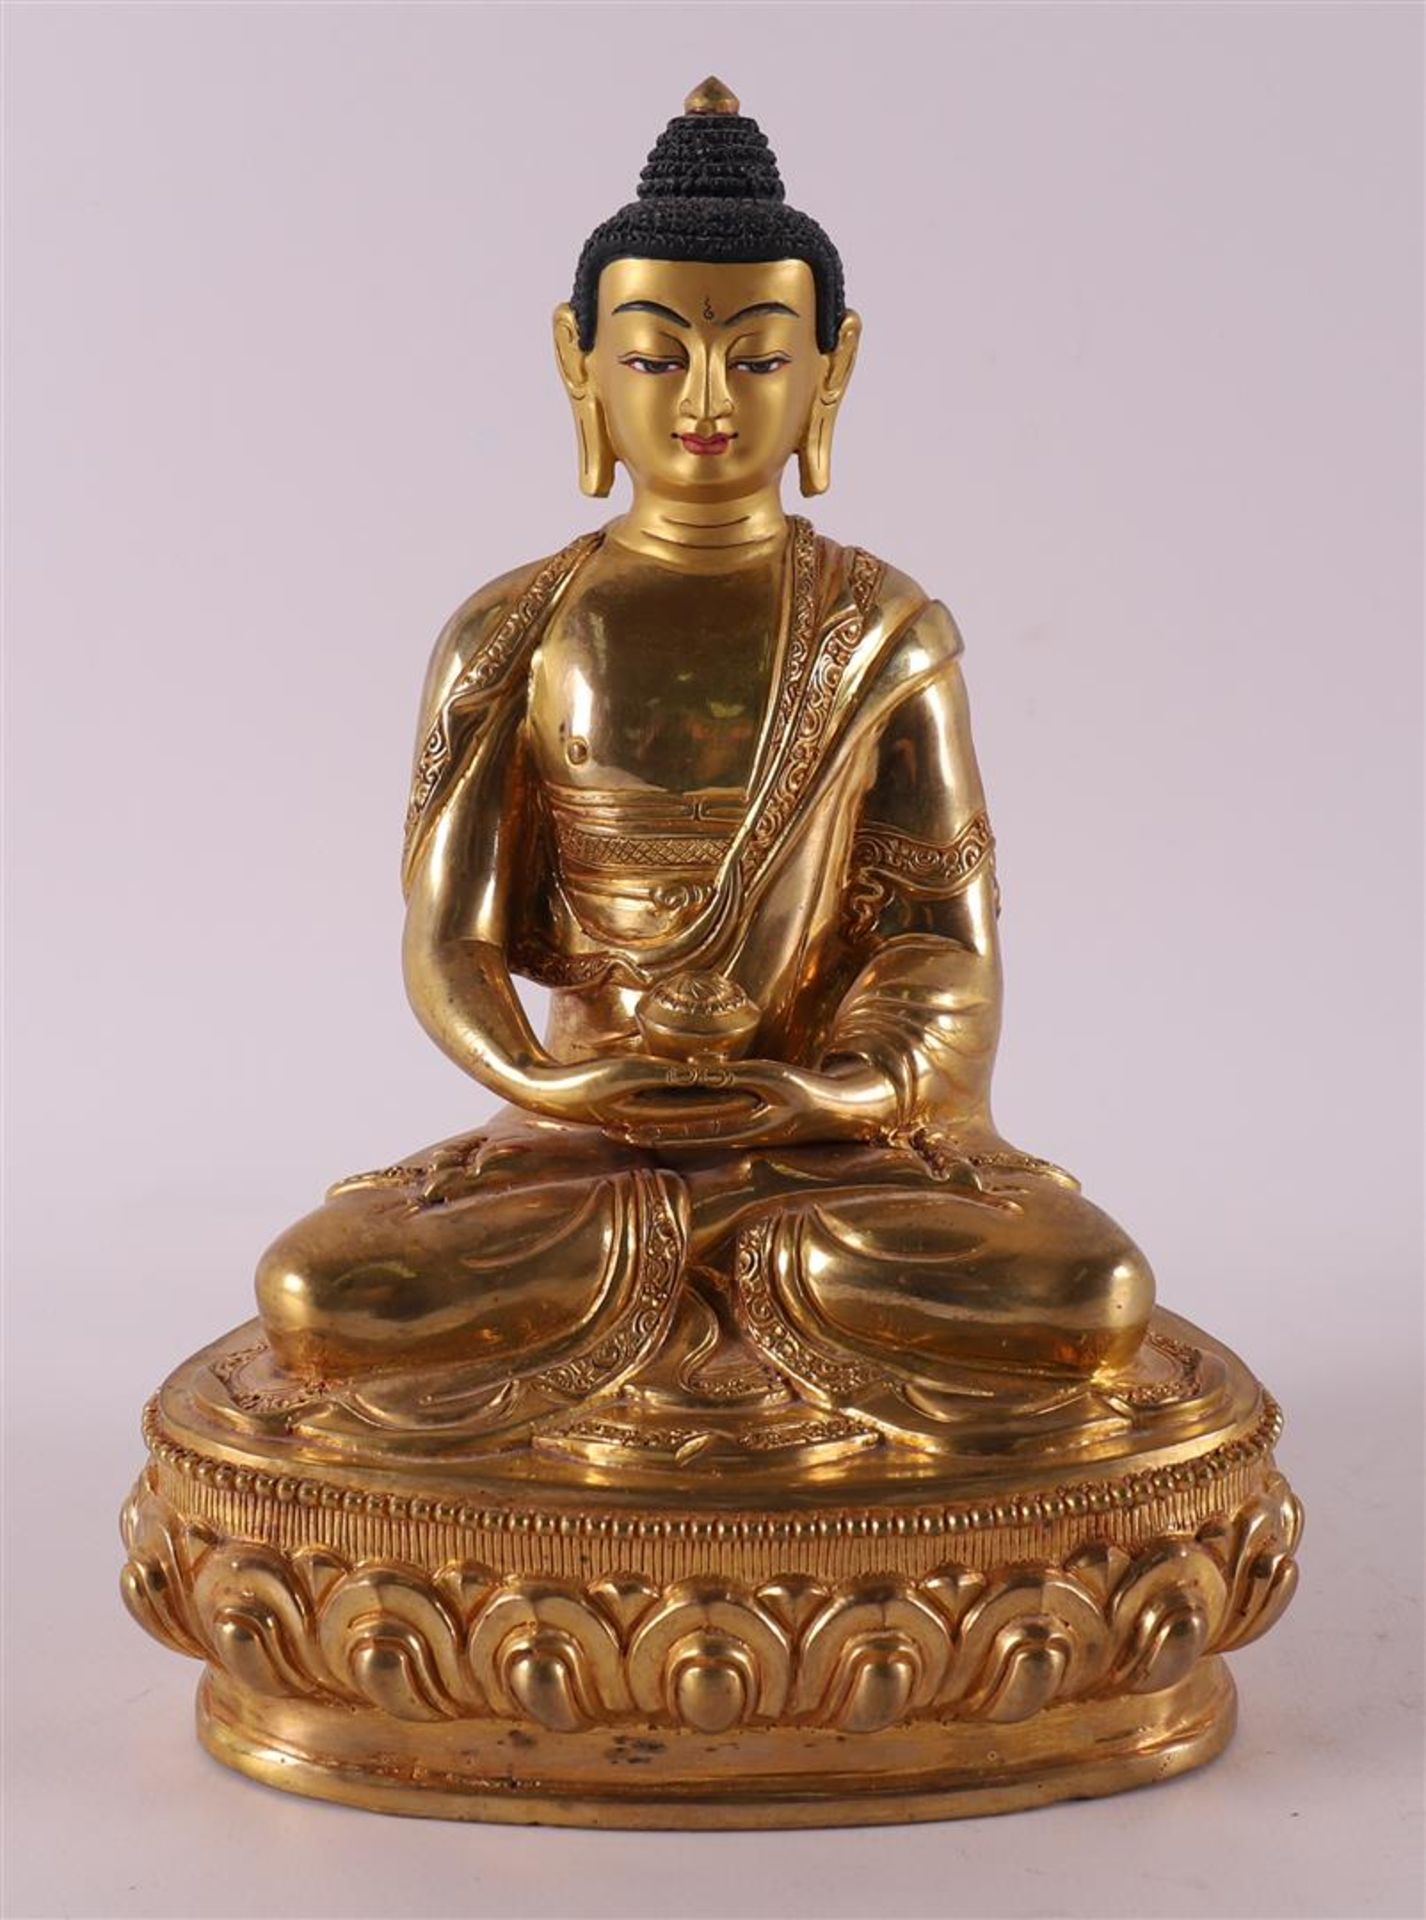 A gilded bronze seated Buddha on a lotus crown, Thailand, 20th/21st century.